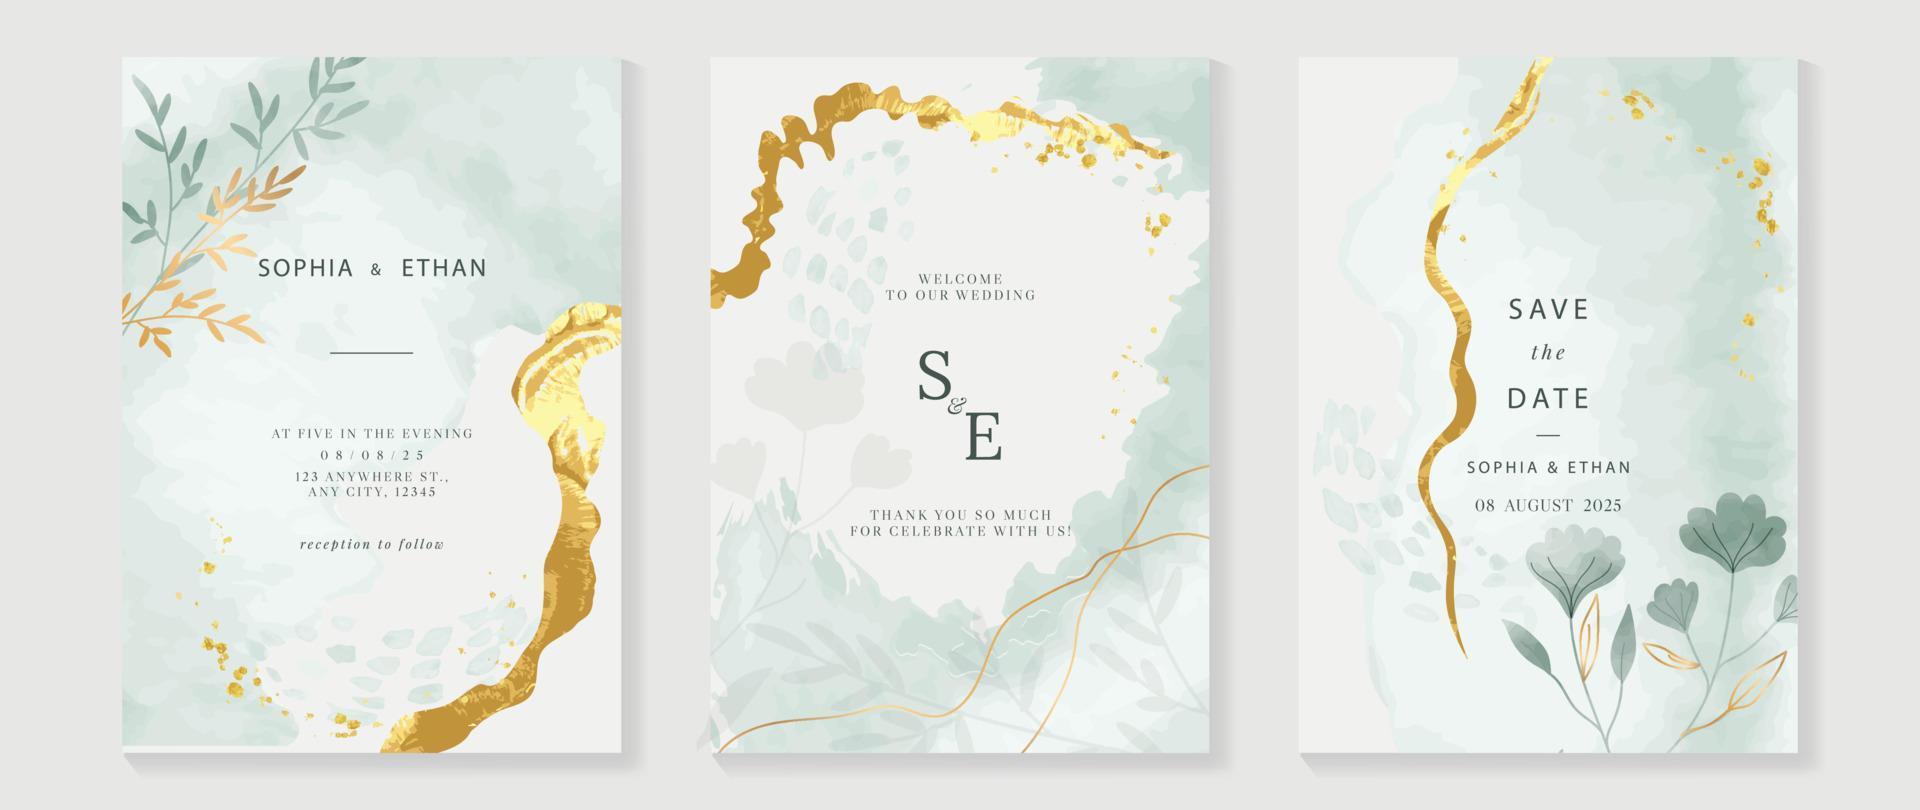 Luxury wedding invitation card background with golden texture line art template. Watercolor flower and botanical leaf branch background. Design illustration for wedding and vip cover template, banner. vector